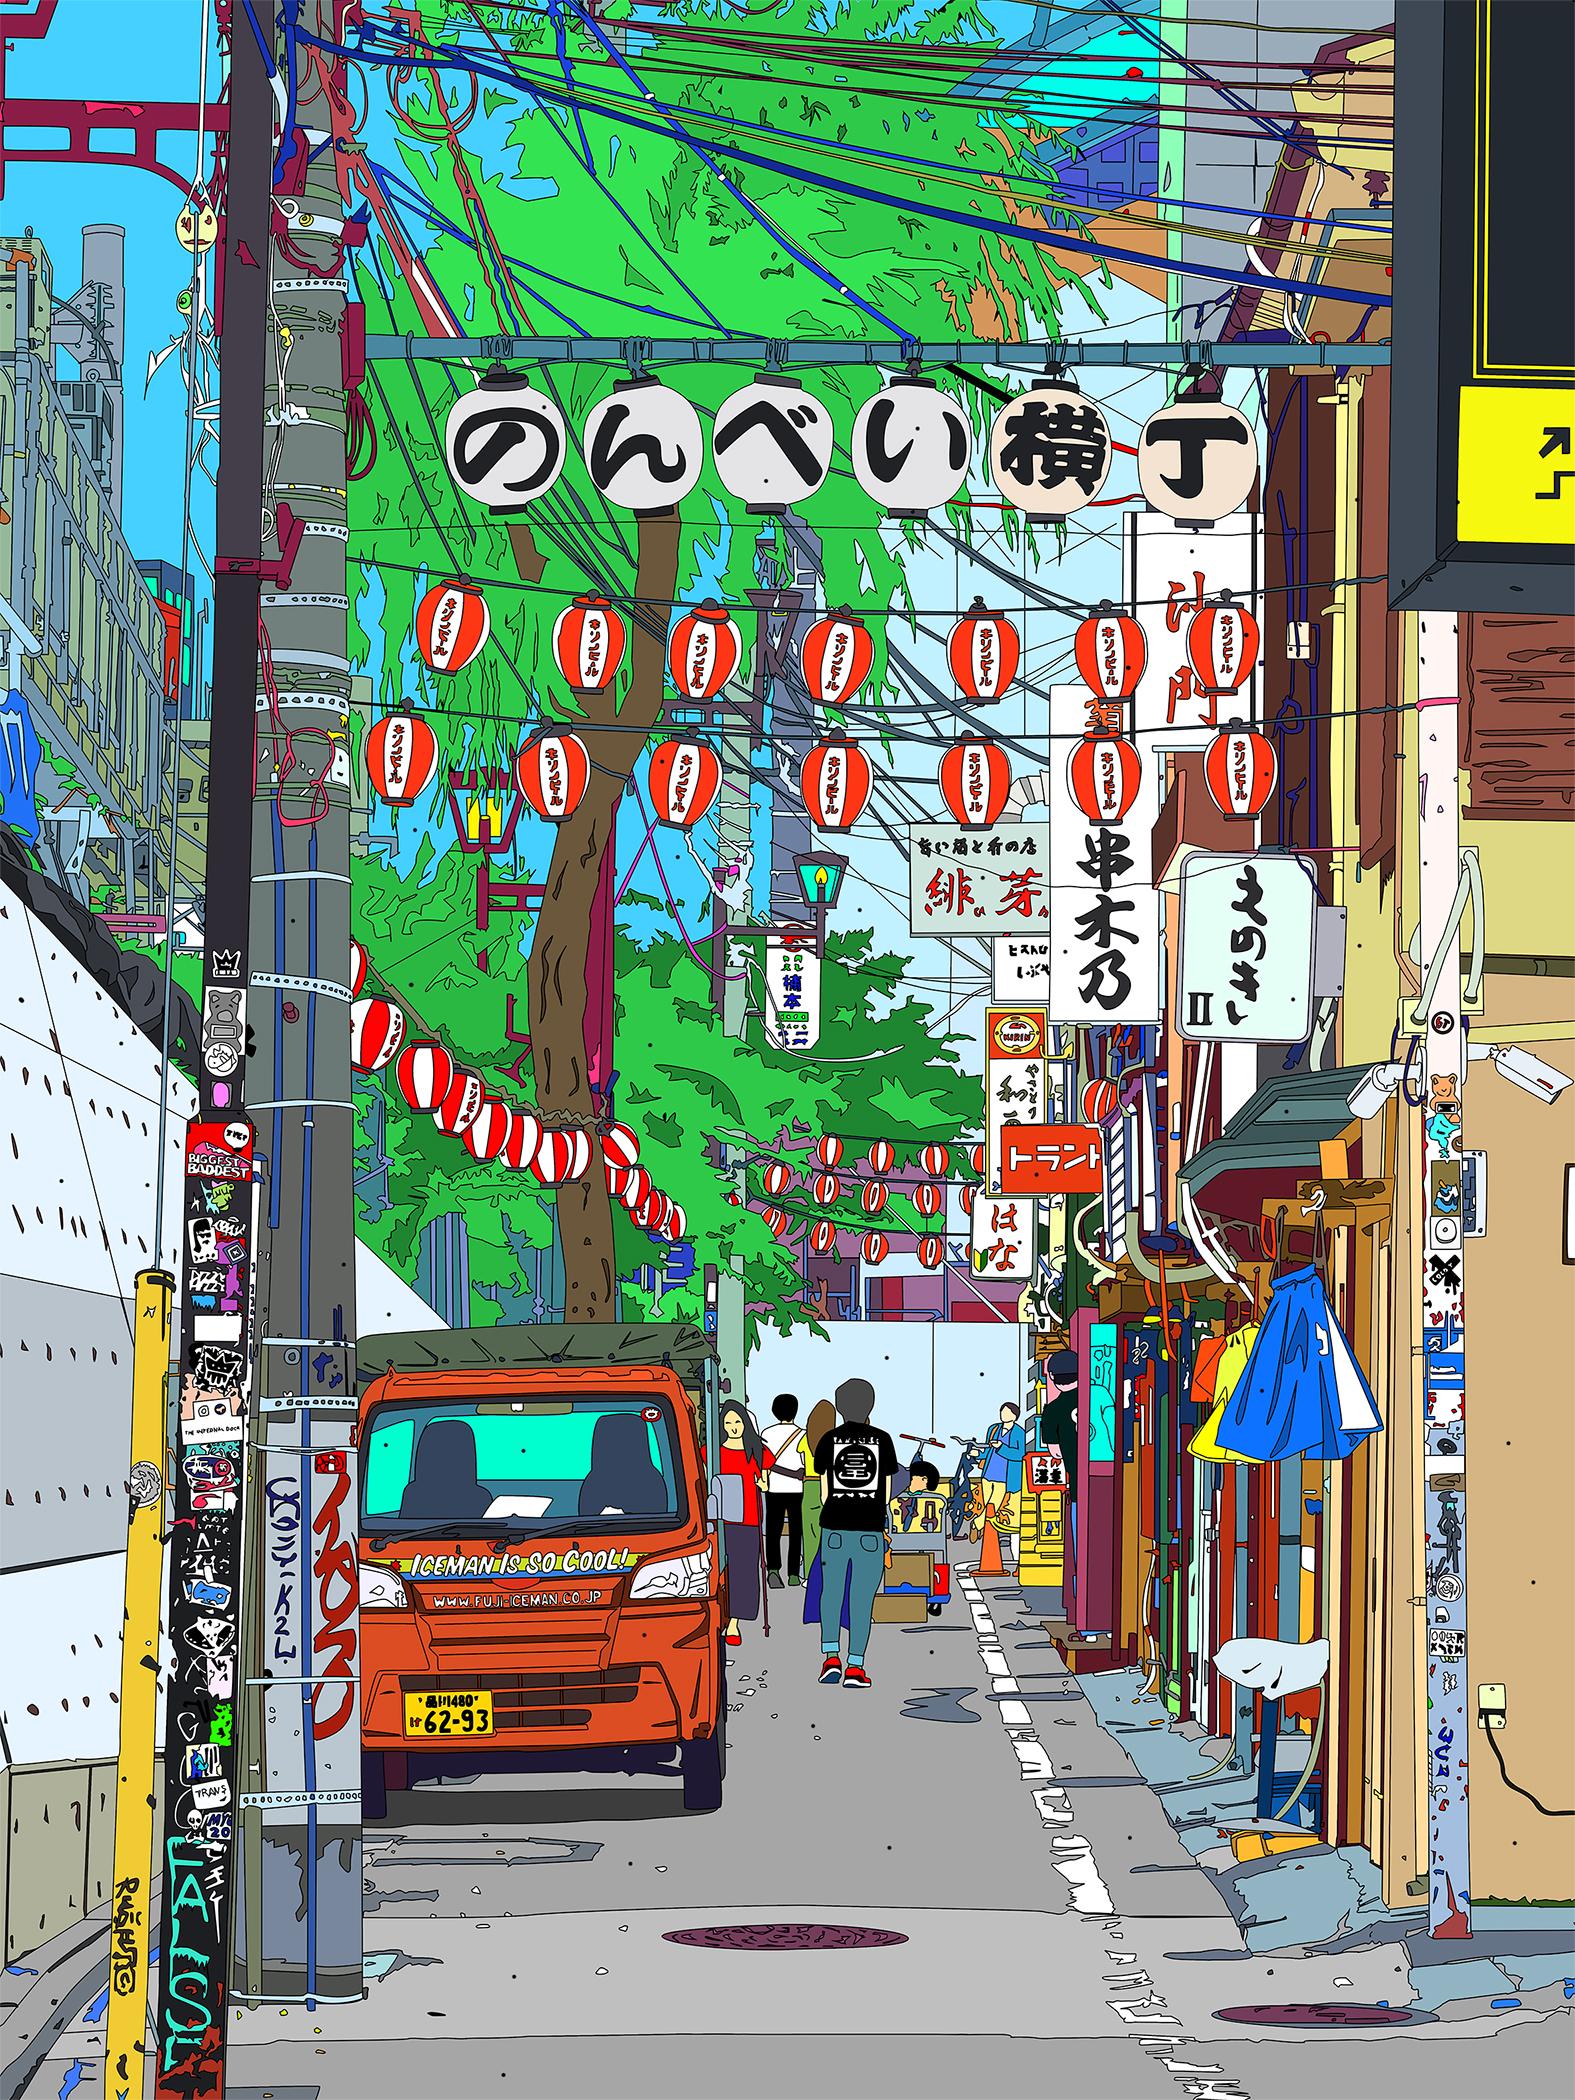 Digital art printed on canvas, original edition 1/1

''This one, looks like a very quiet alley in Tokyo, instead it is super close to one of the busiest areas in Tokyo, Shibuya crossing! Madness and quietness so close are so perfect.''

Marco